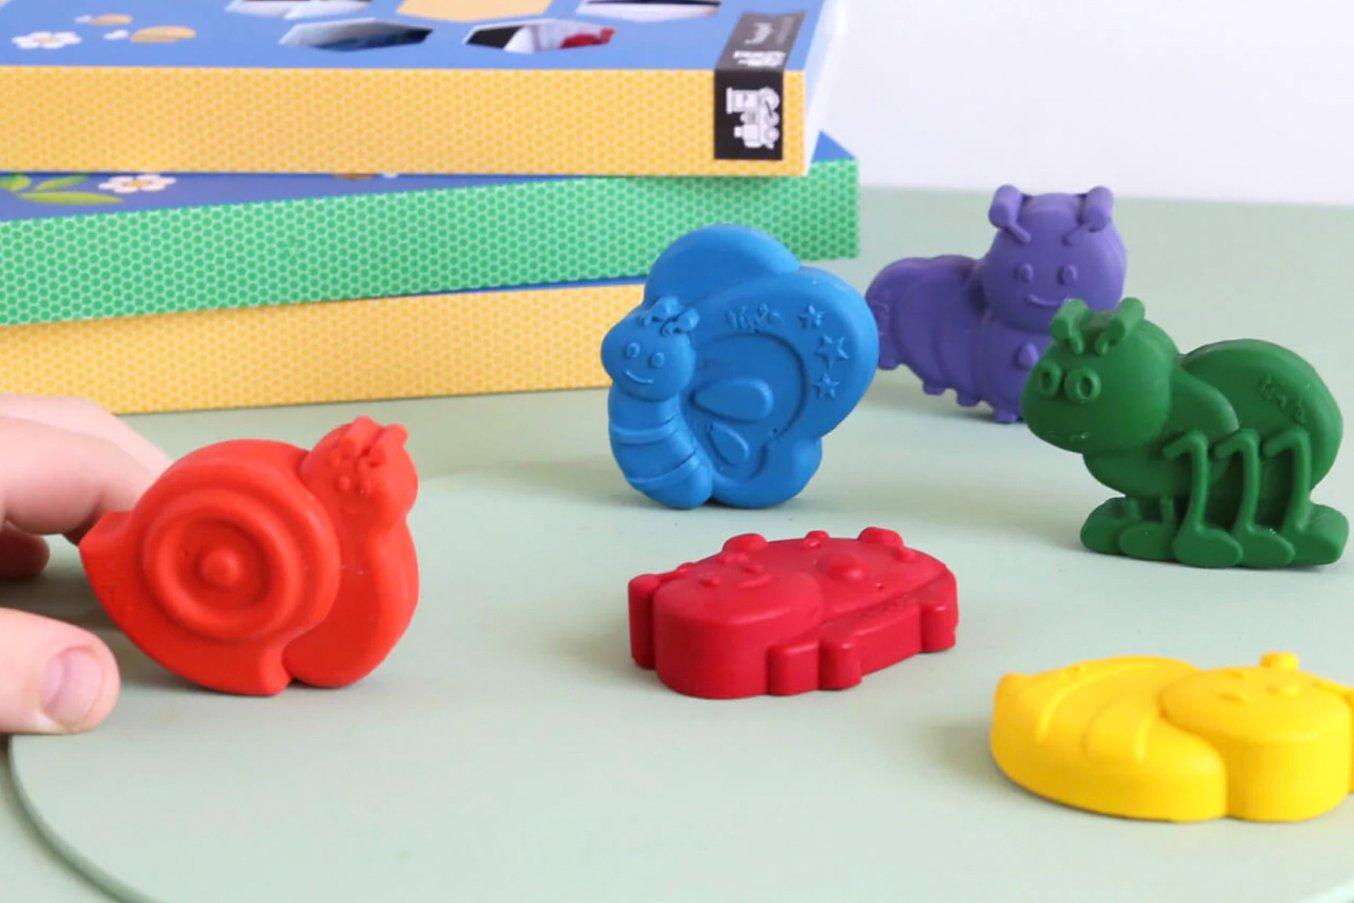 Silicone molded crayons